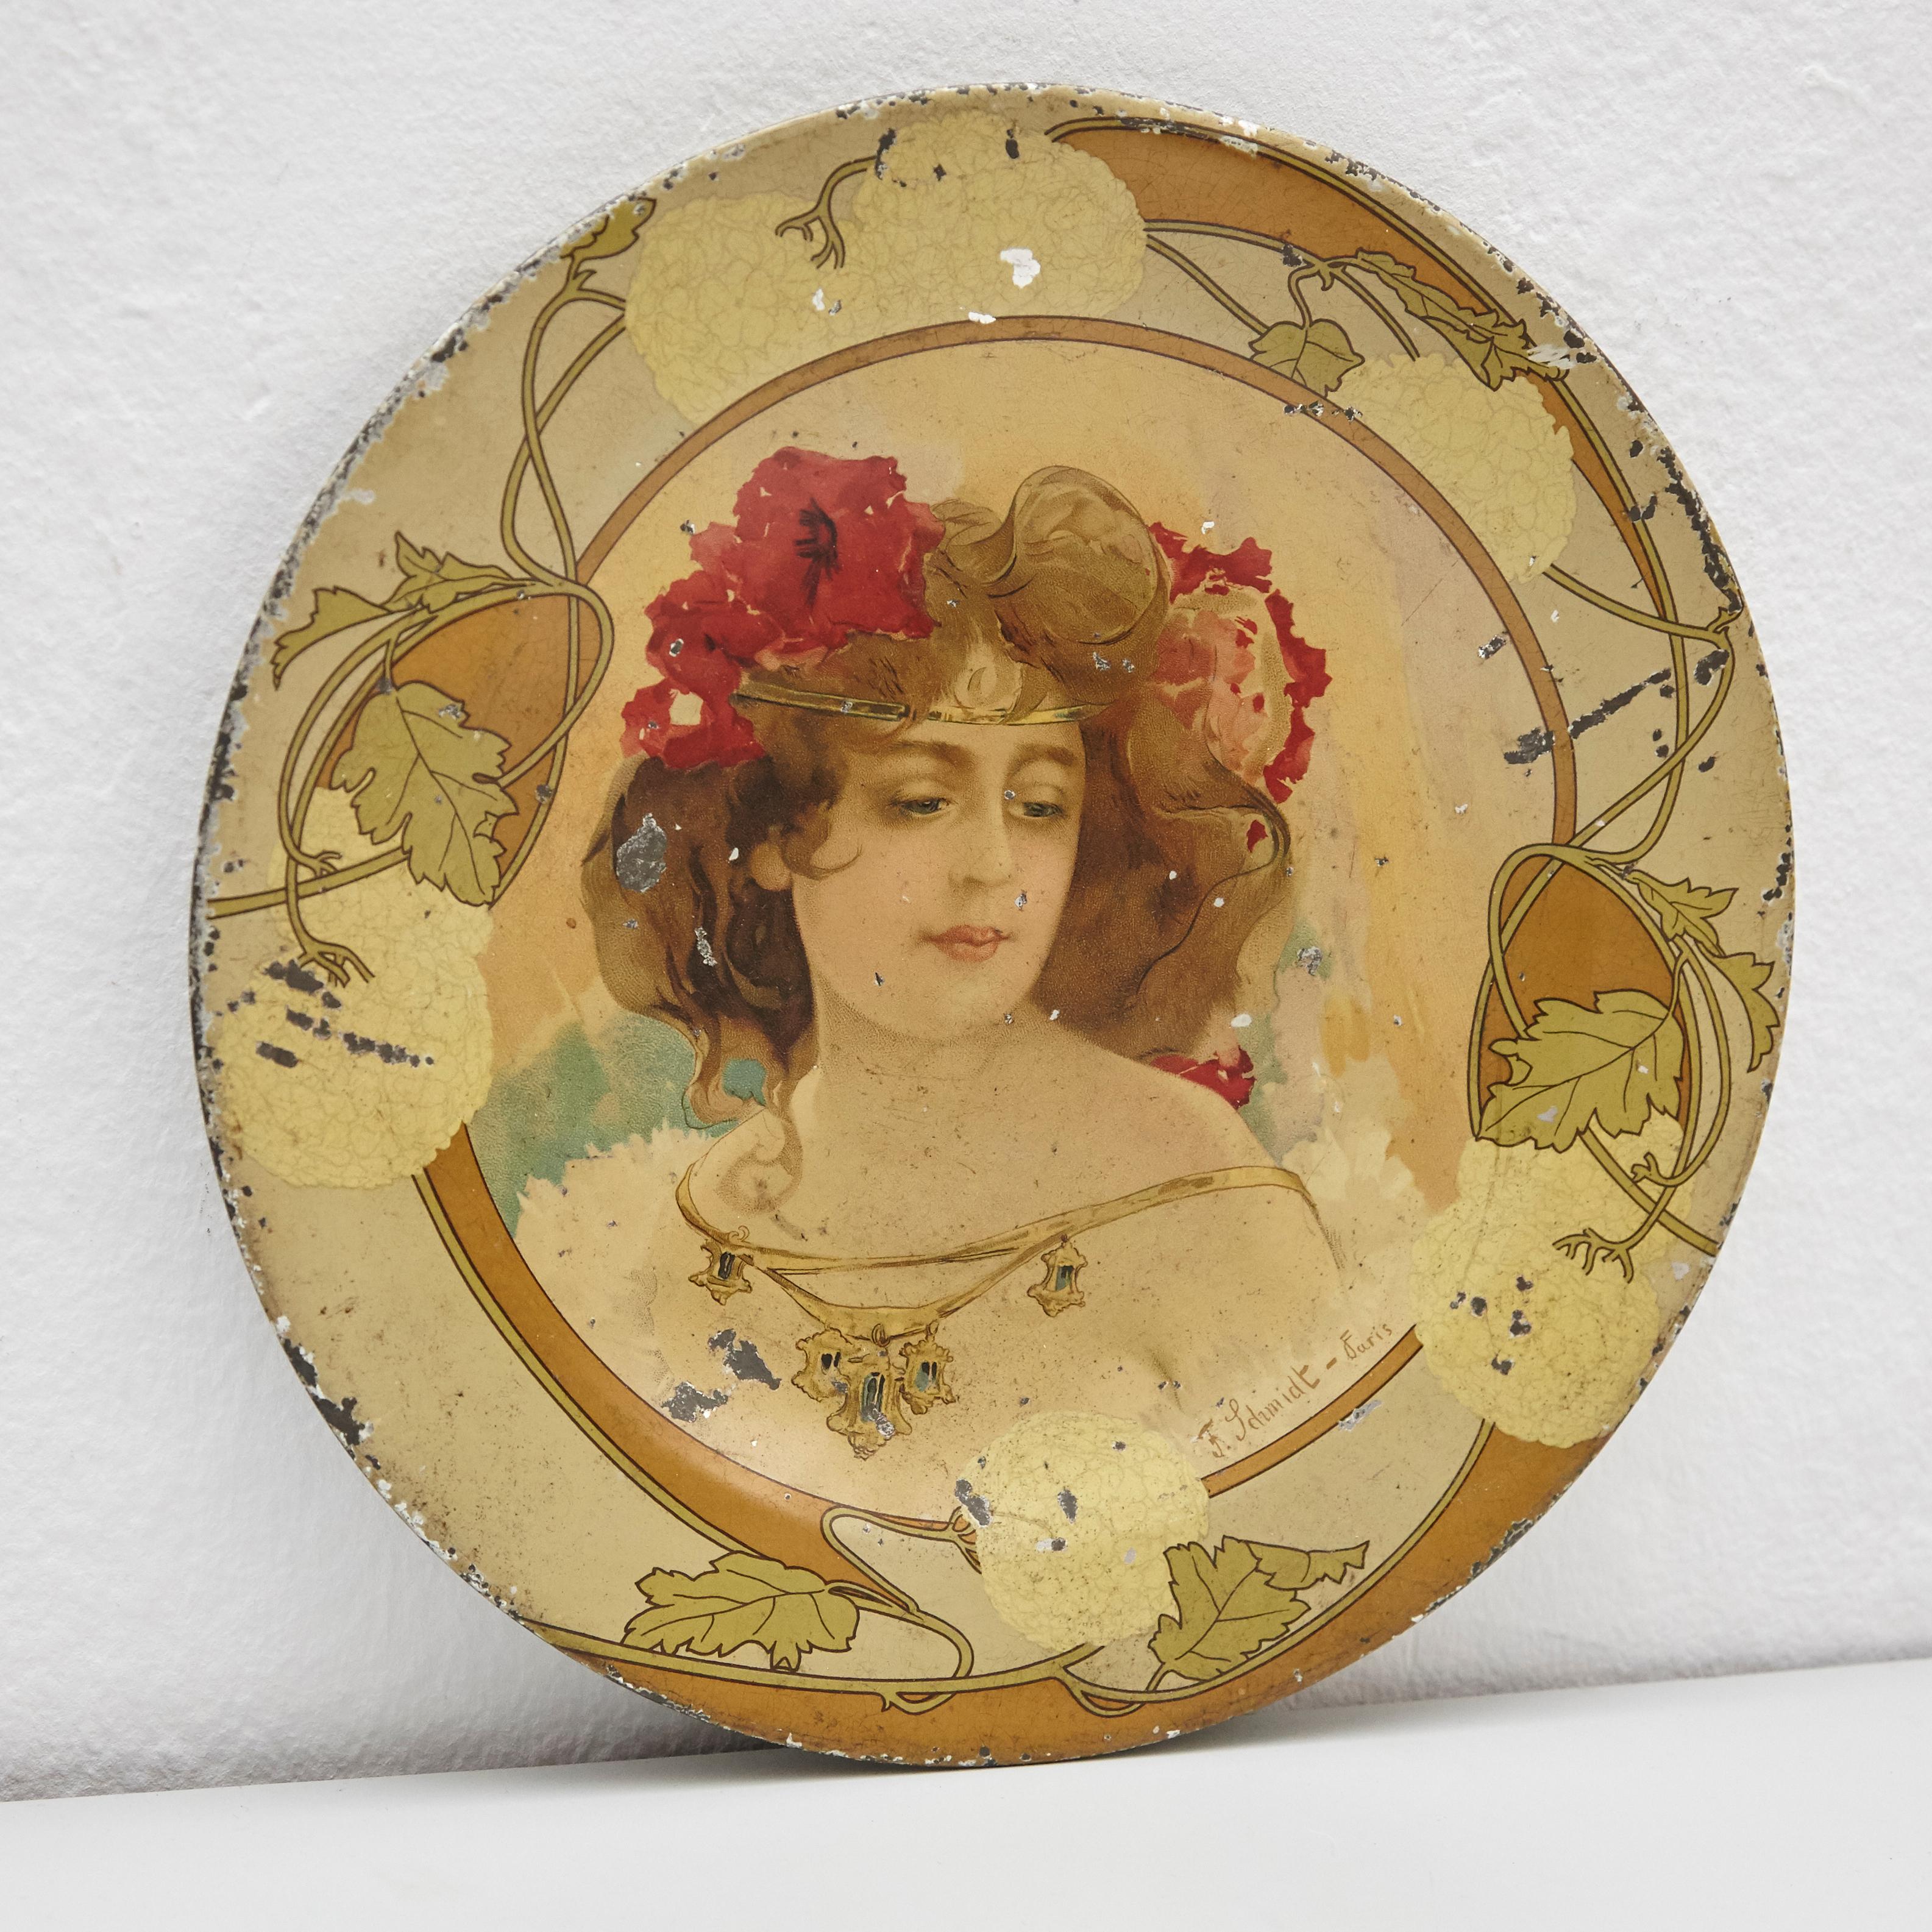 19th century metal plate, Art Nouveau style.
By unknown manufacturer, France.
In original condition, with minor wear consistent of age and use, preserving a beautiful patina.

Materials:
Metal

Dimensions:
ø 30.5 cm x 2 cm.